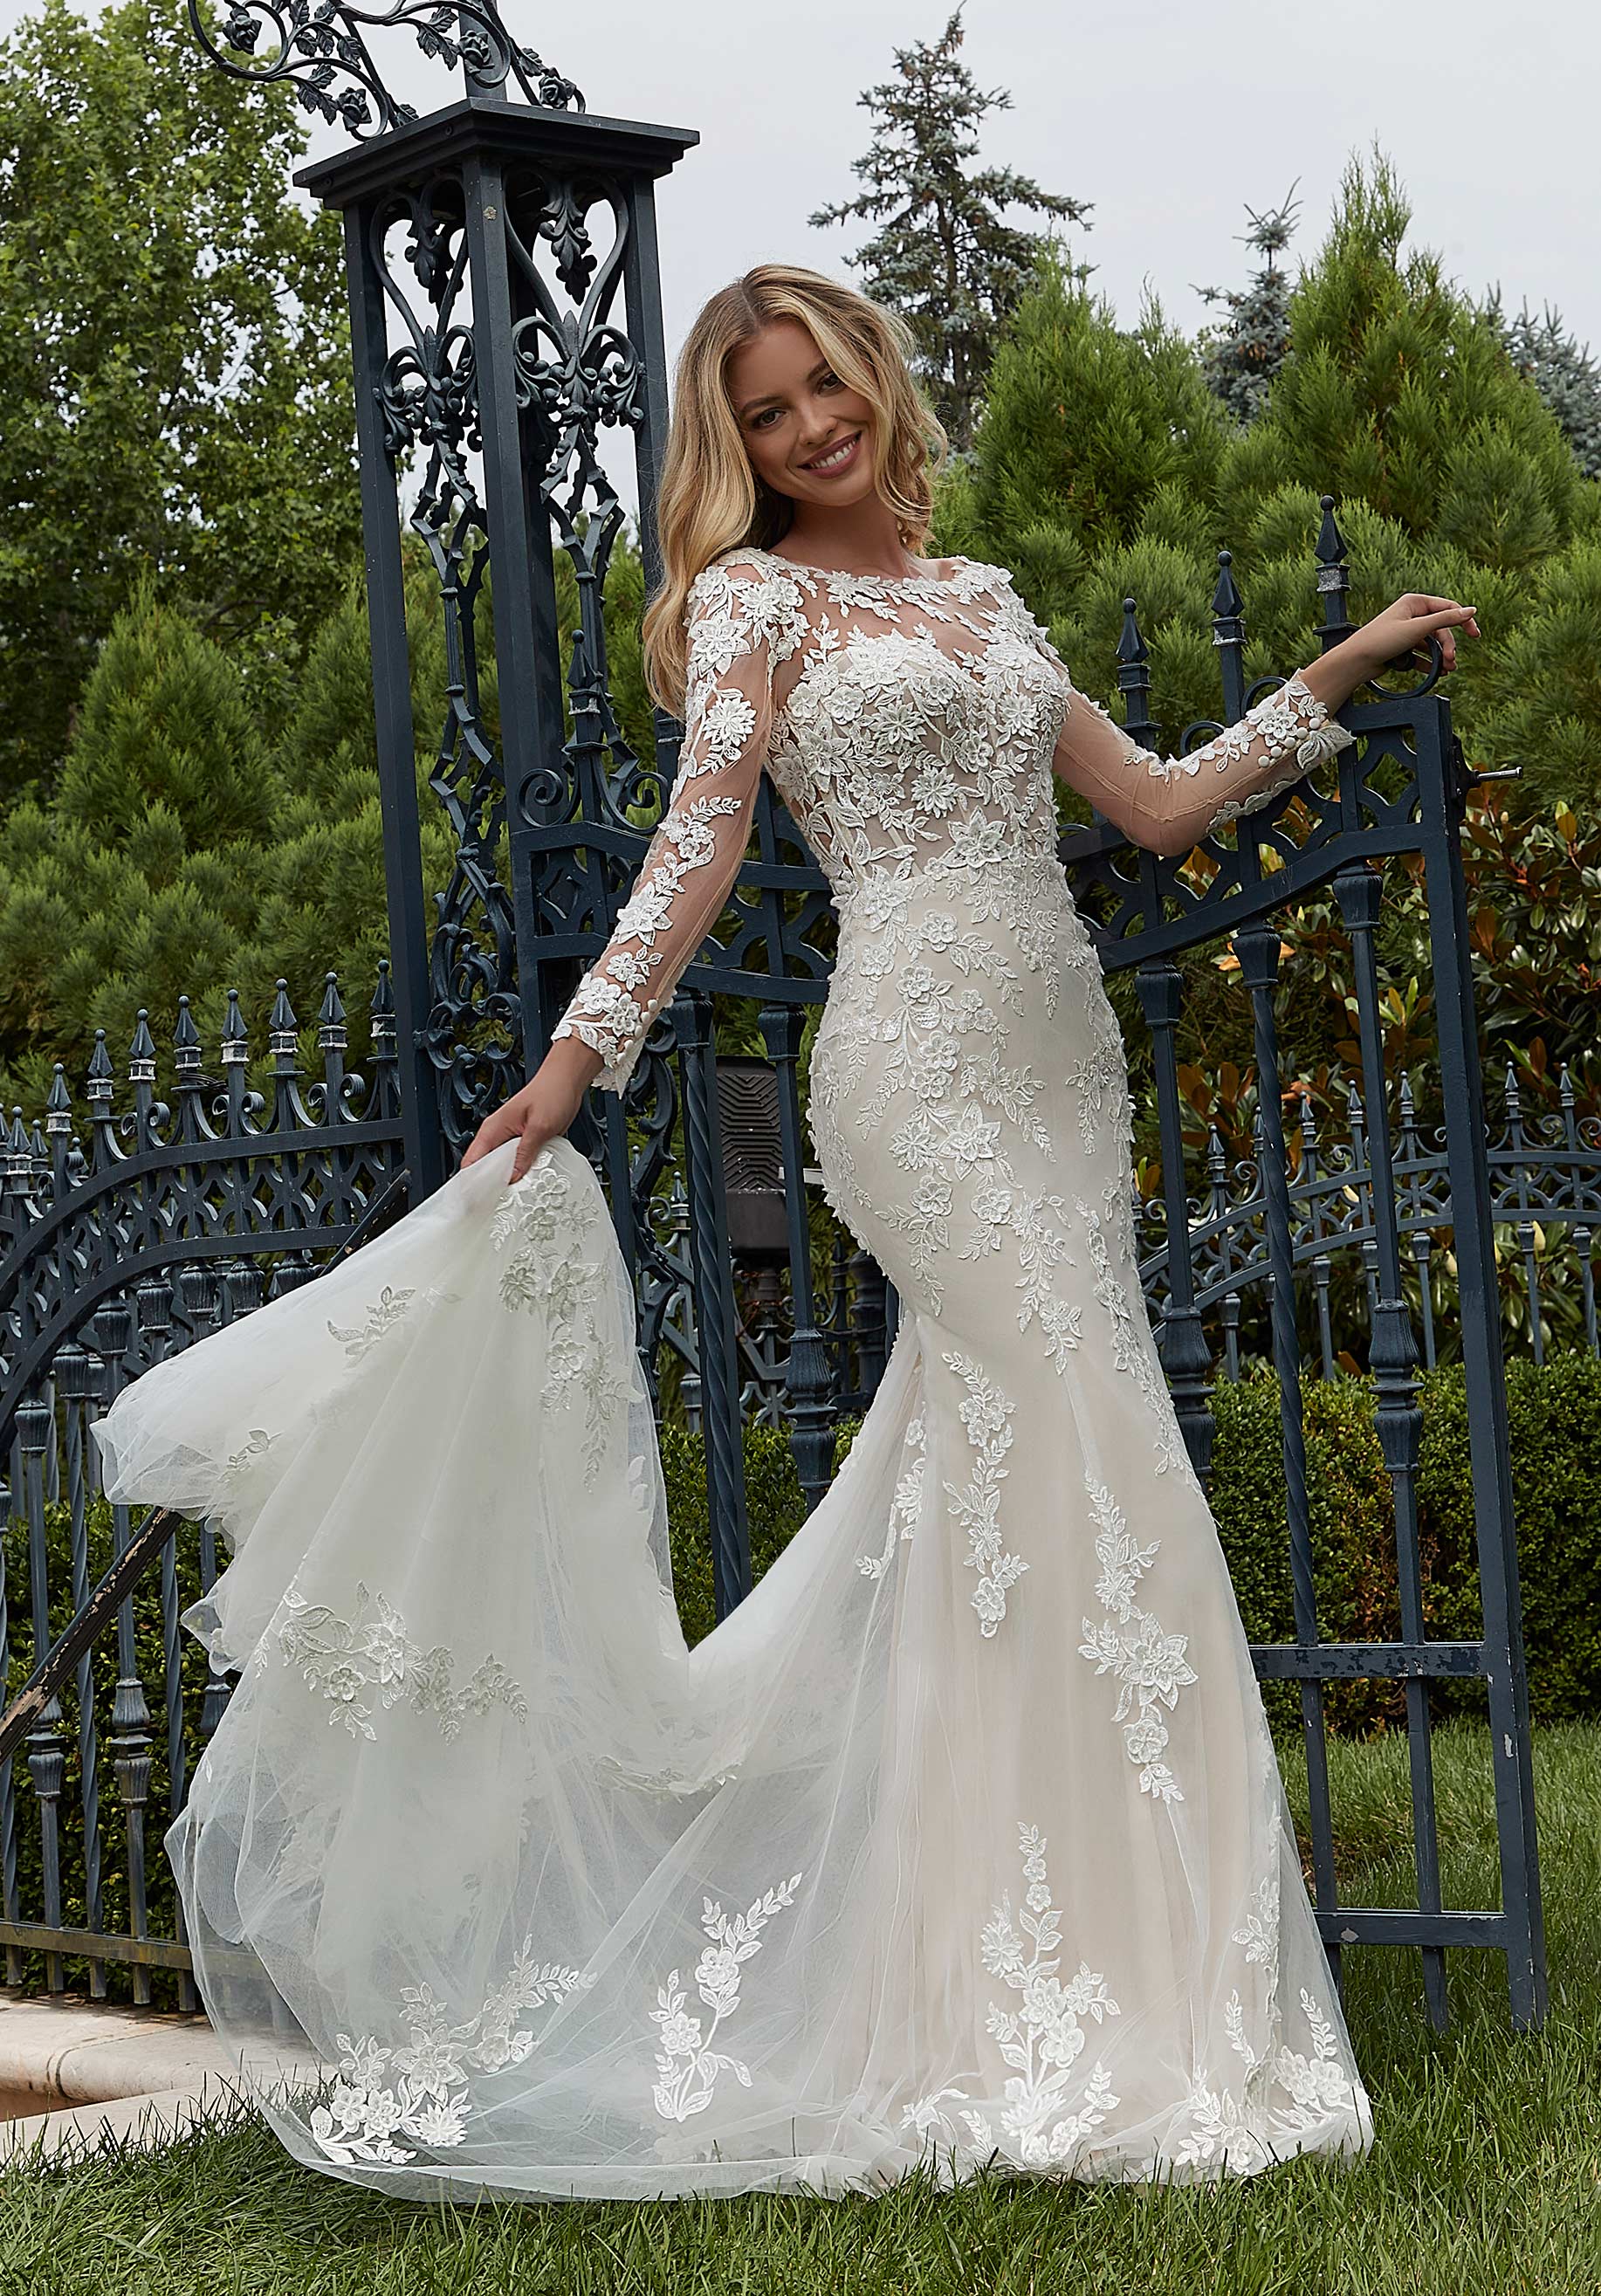 41 Best Winter Wedding Dresses 2021 - hitched.co.uk - hitched.co.uk